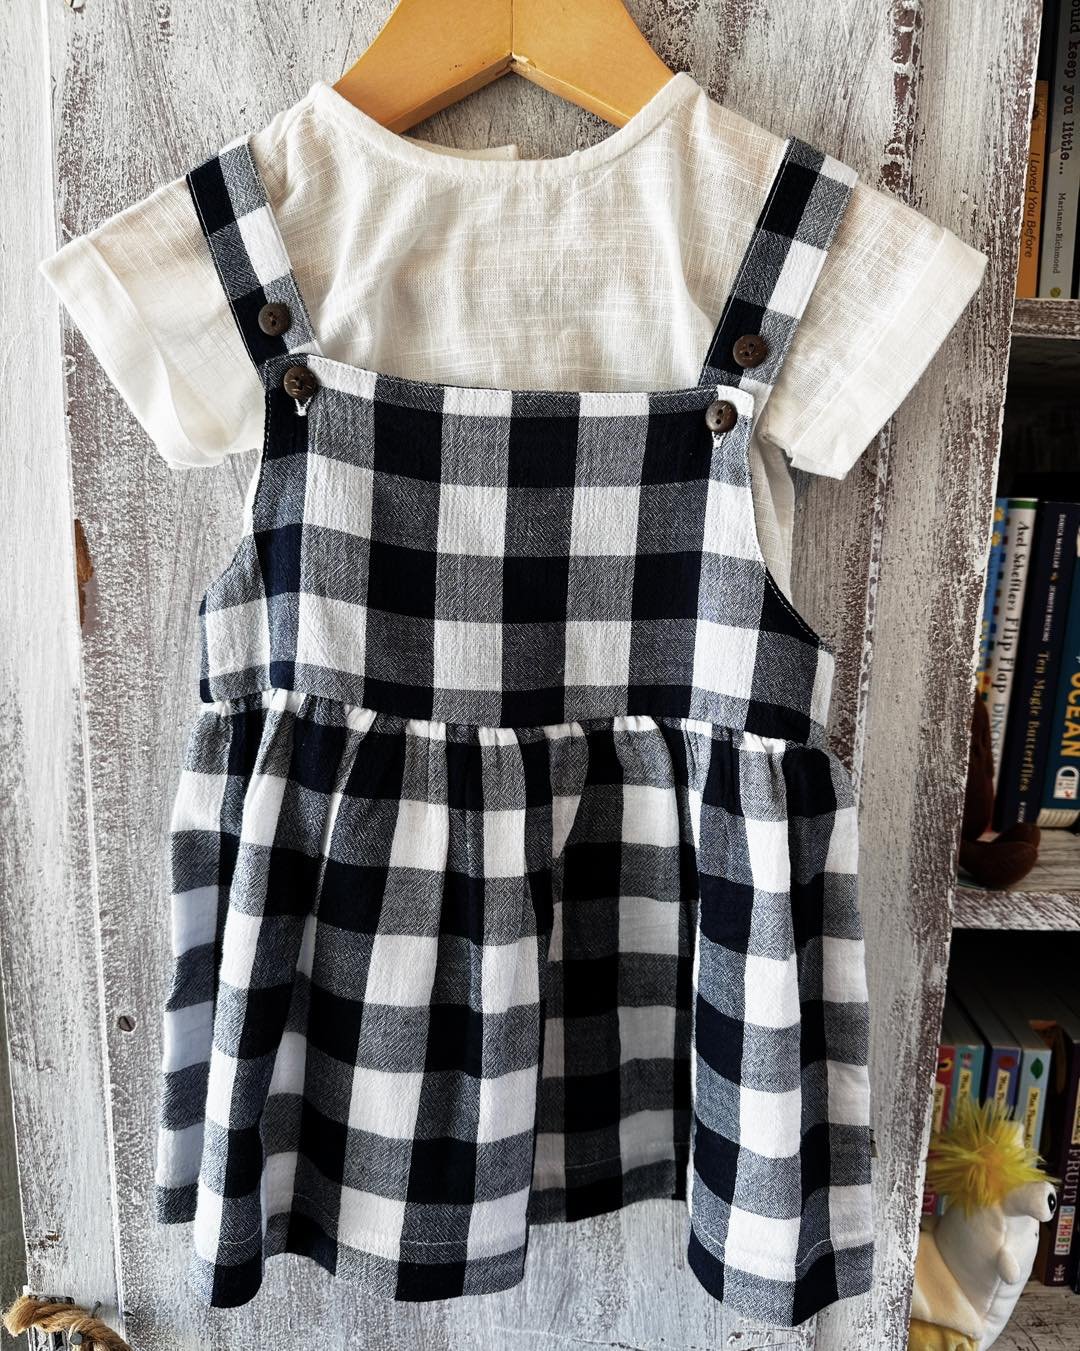 This classic look just arrived and we are loving it! 

Shop this spring look and so many others now at A Baby Naturally. There is always something new to discover! 

#shopsmall #shoplocal #ababynaturally #babyboutique #supportsmallbusiness